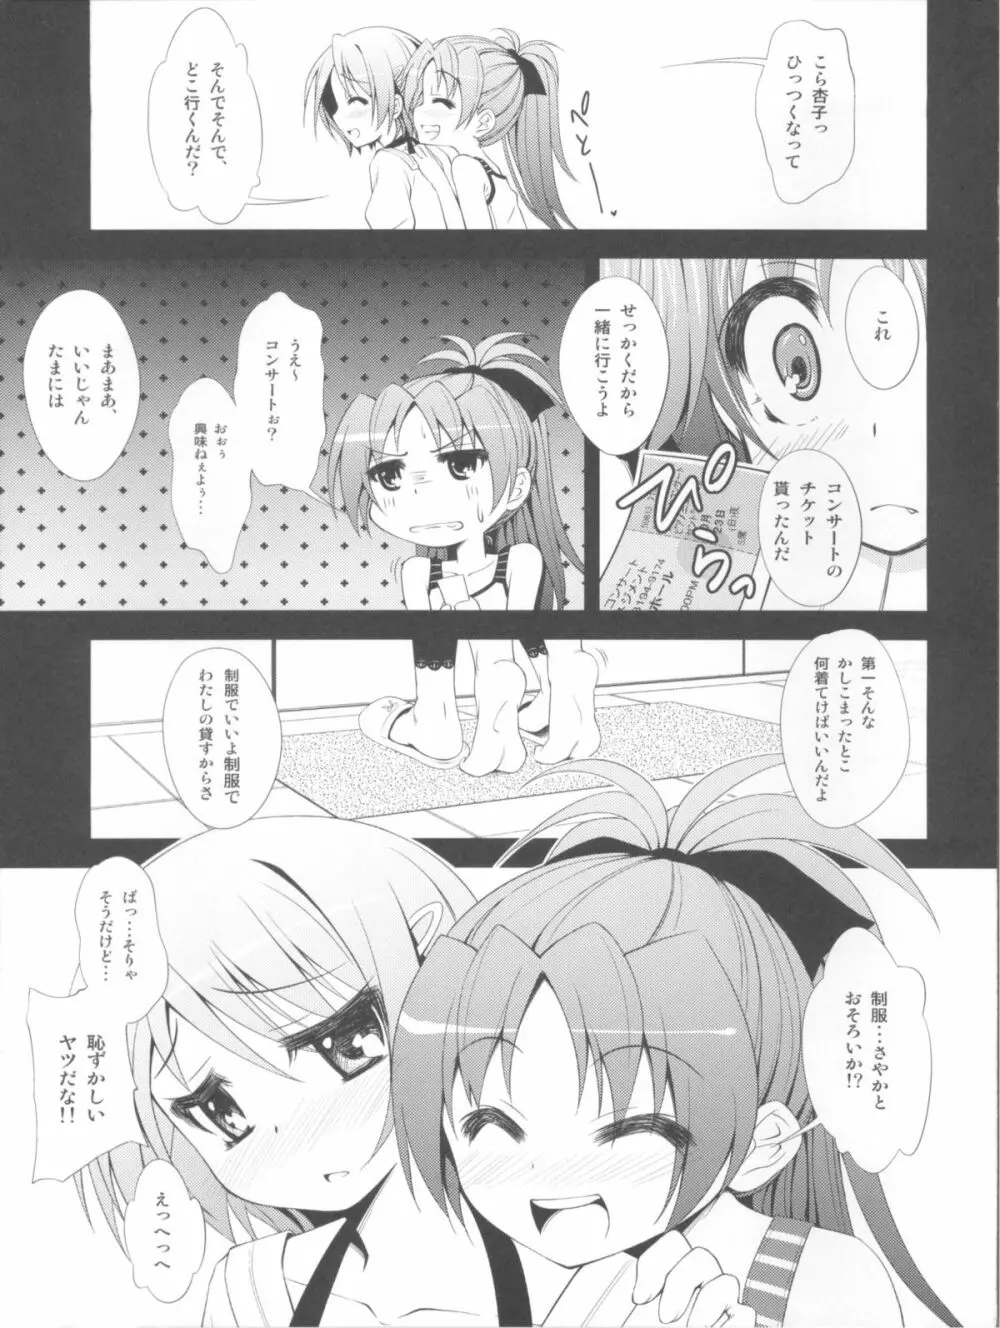 Lovely Girls' Lily vol.2 - page4